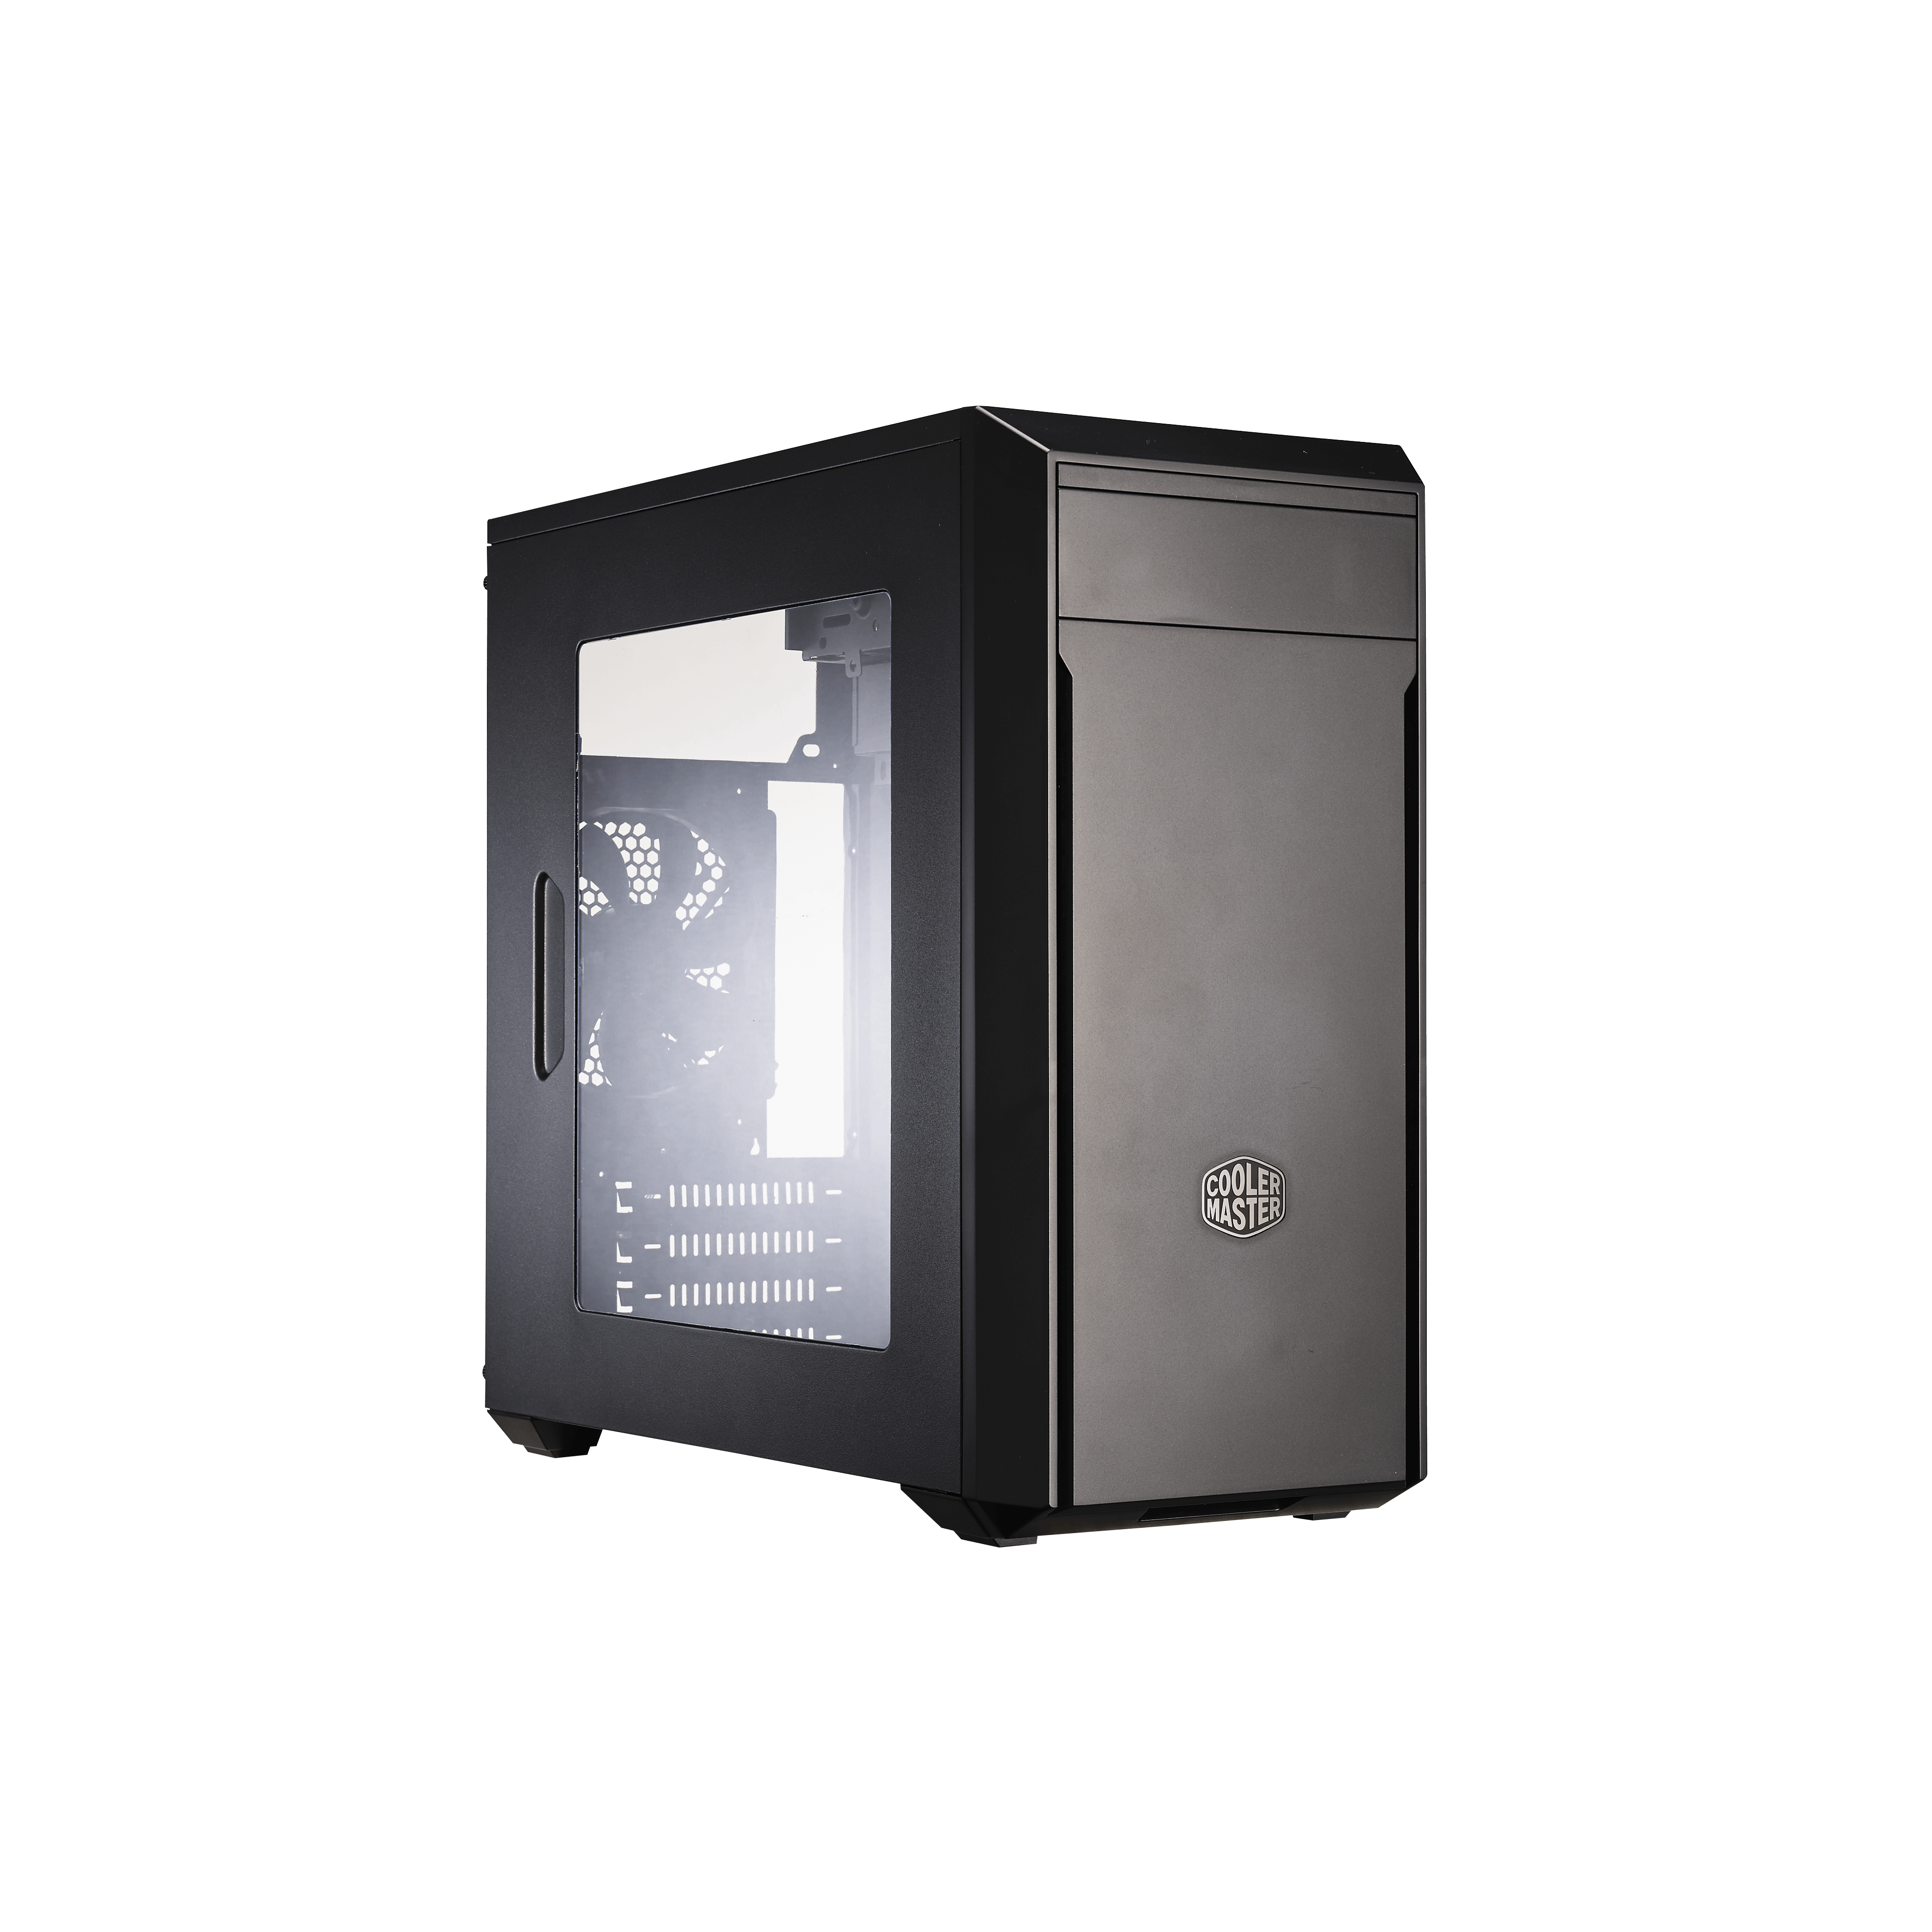 Cooler Master MasterBox Lite 3.1 TG mATX Case with Dark Mirror Front Panel,  Tempered Glass Side Panel Customizable Trim Colors